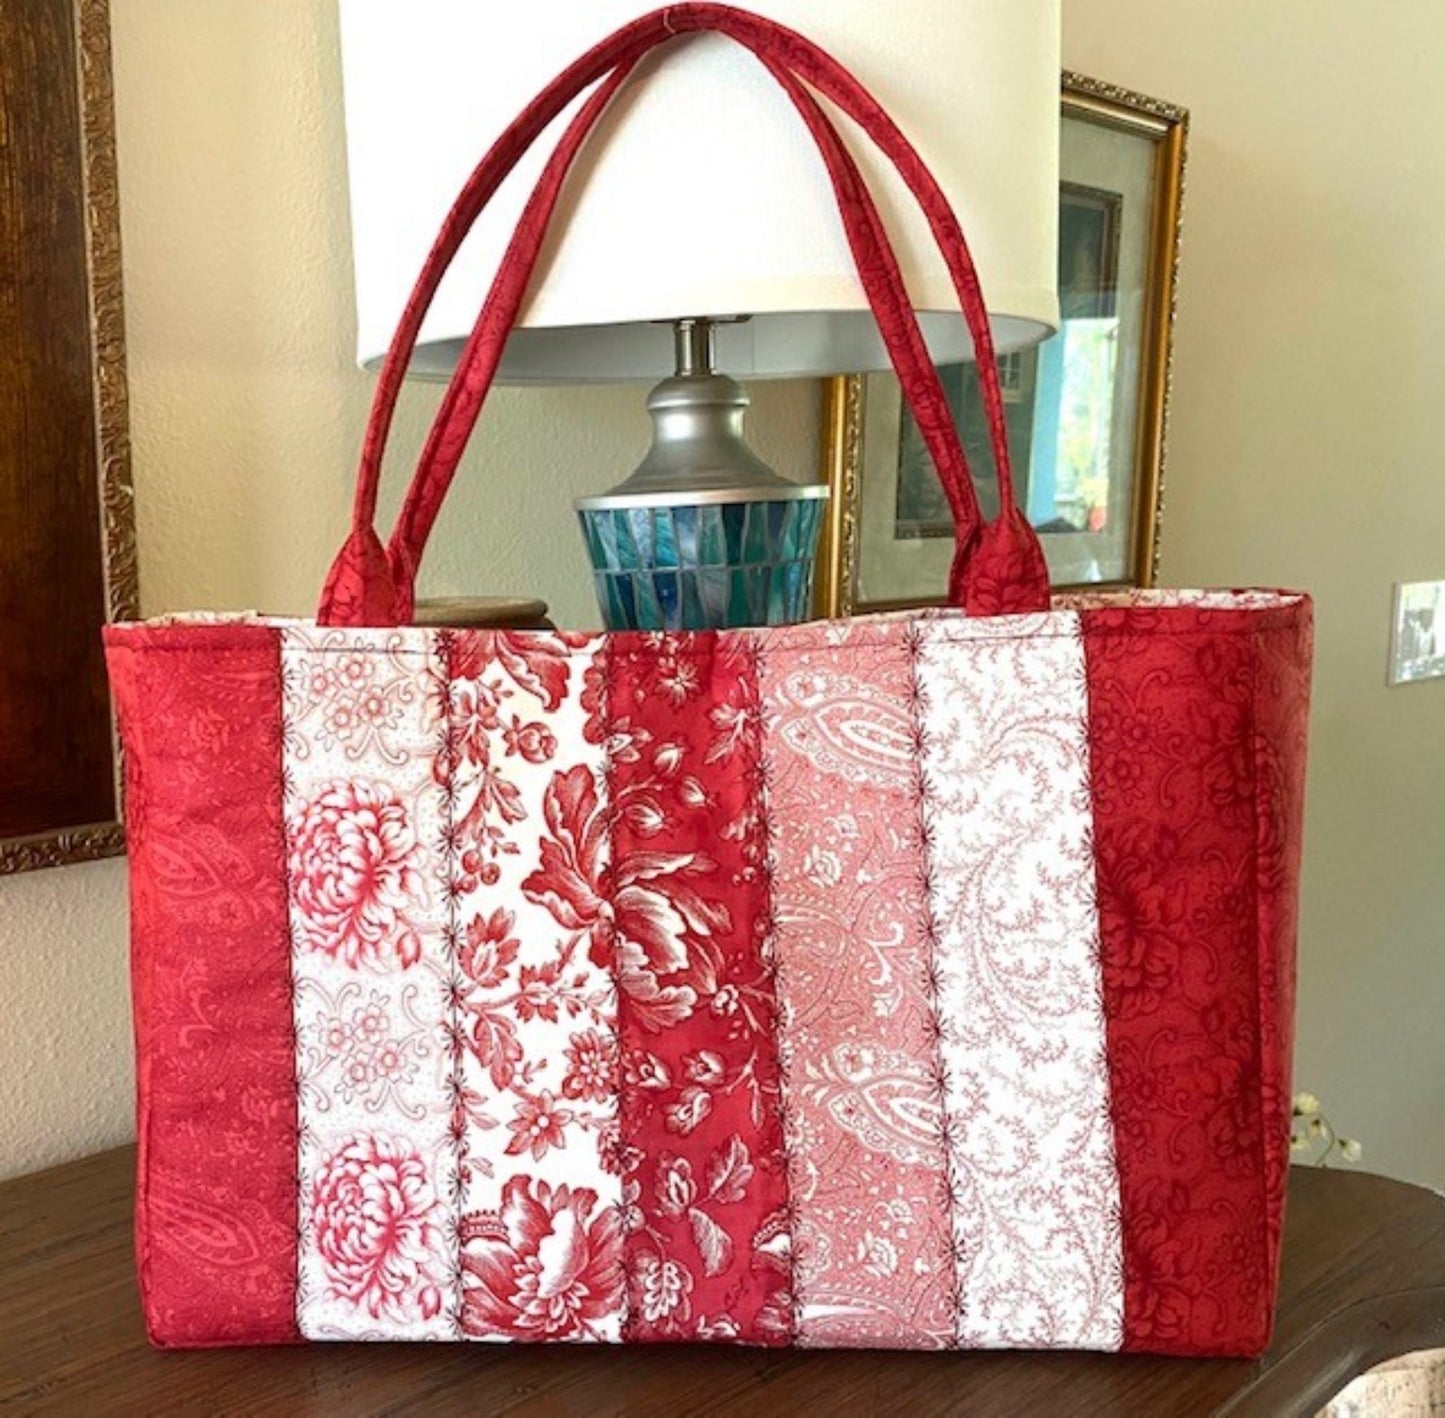 Tote Purse Handbag Patchwork Cranberries fabric 3 Sisters Matching Wallet too